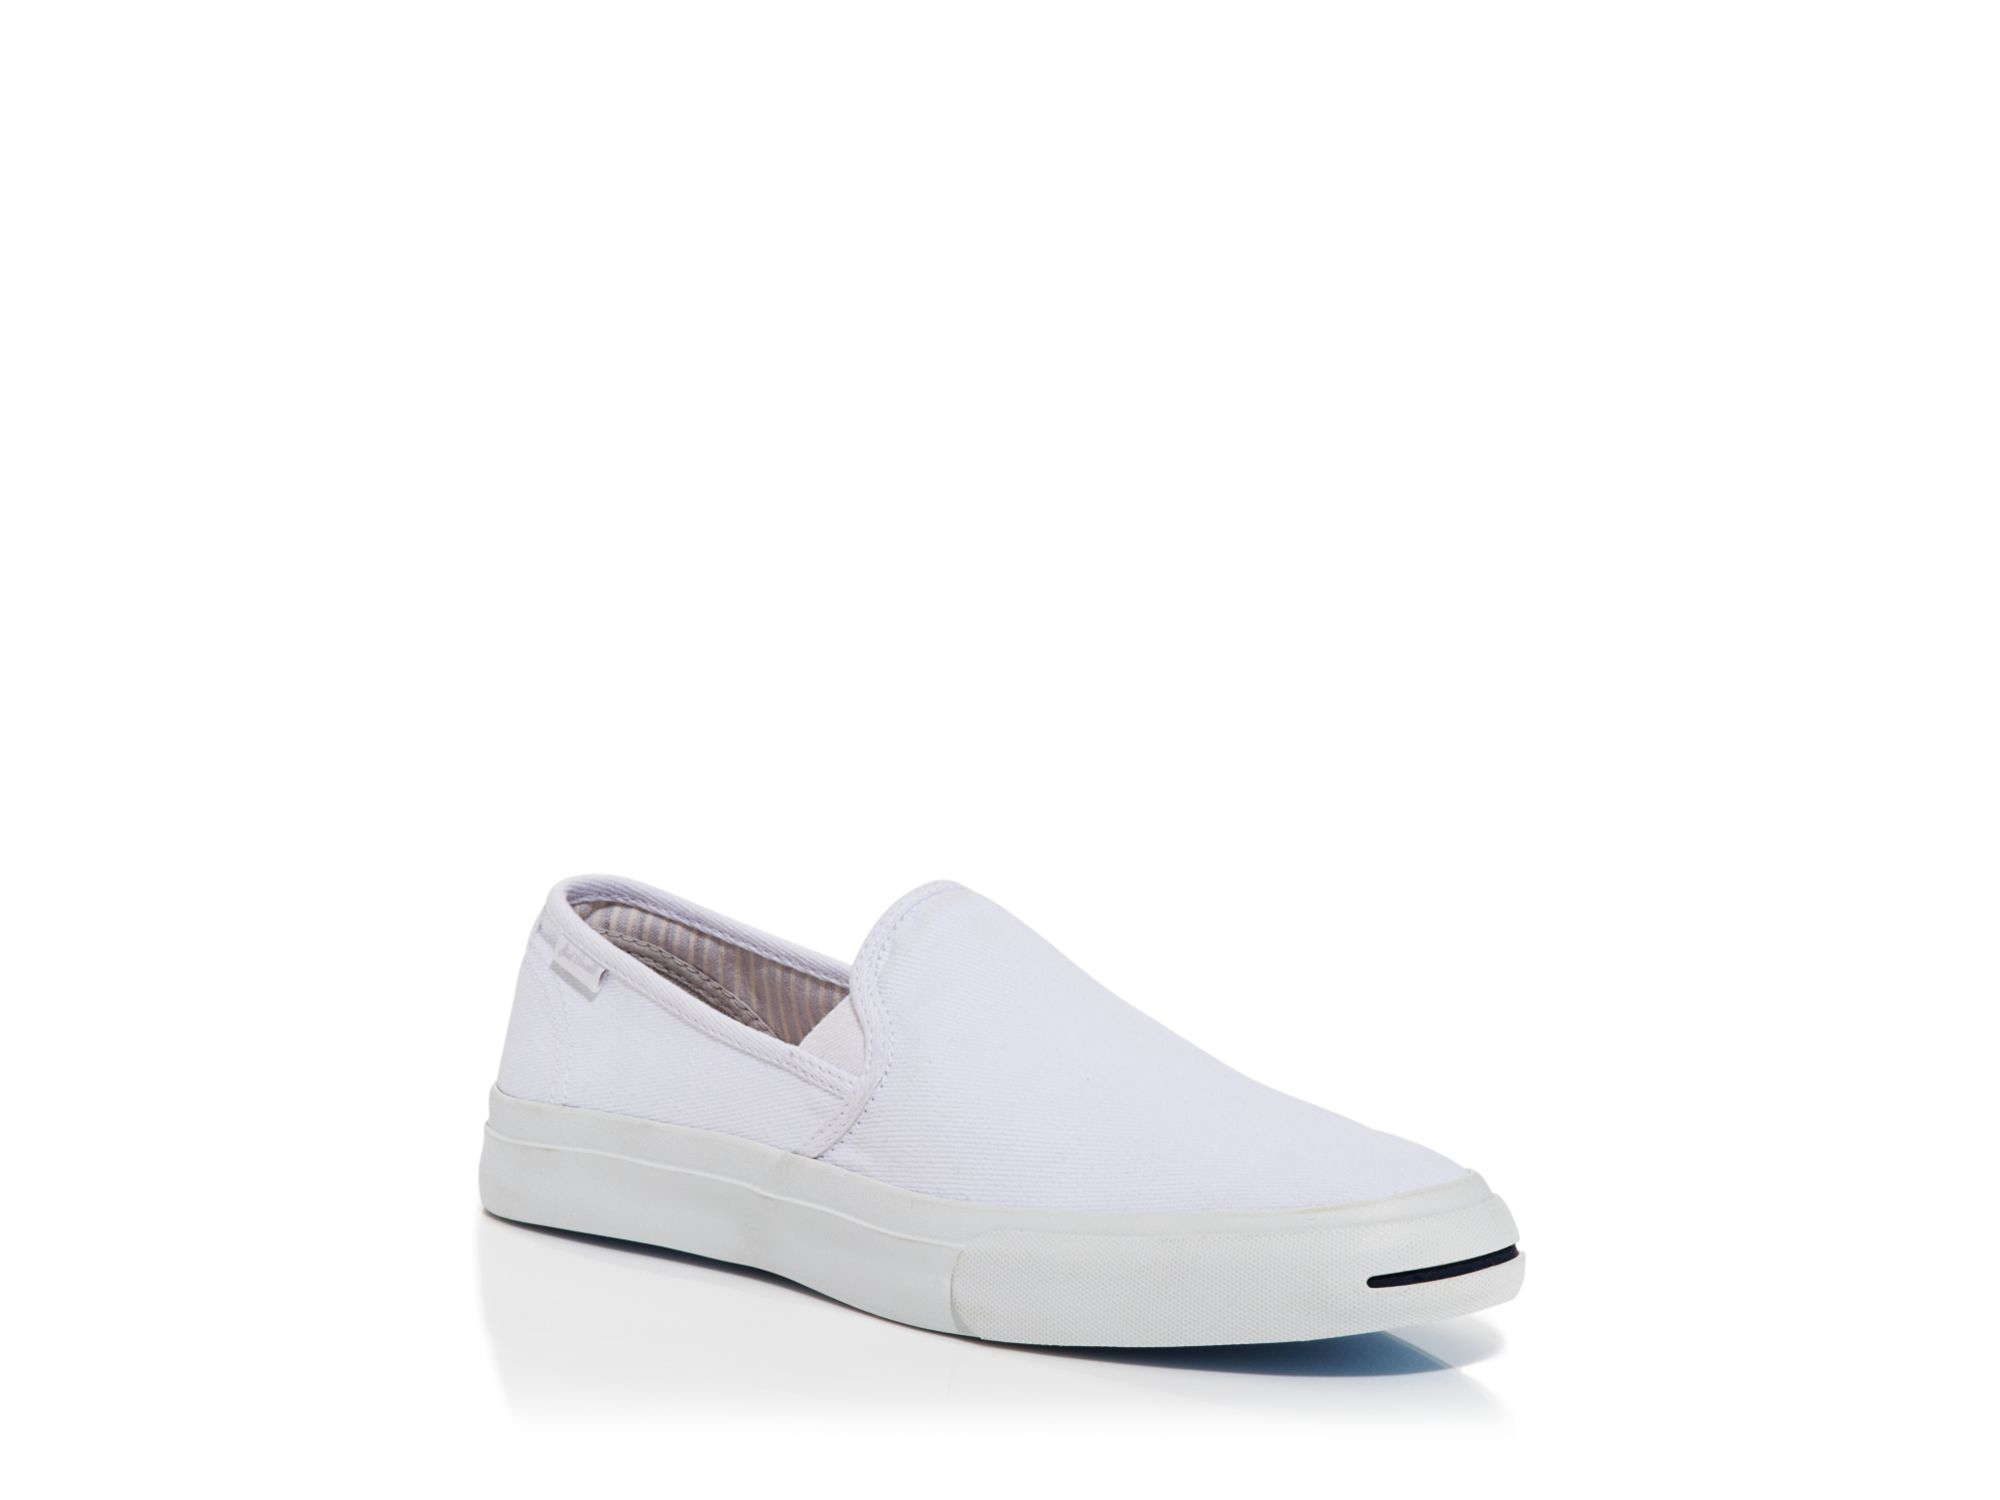 converse jack purcell slip